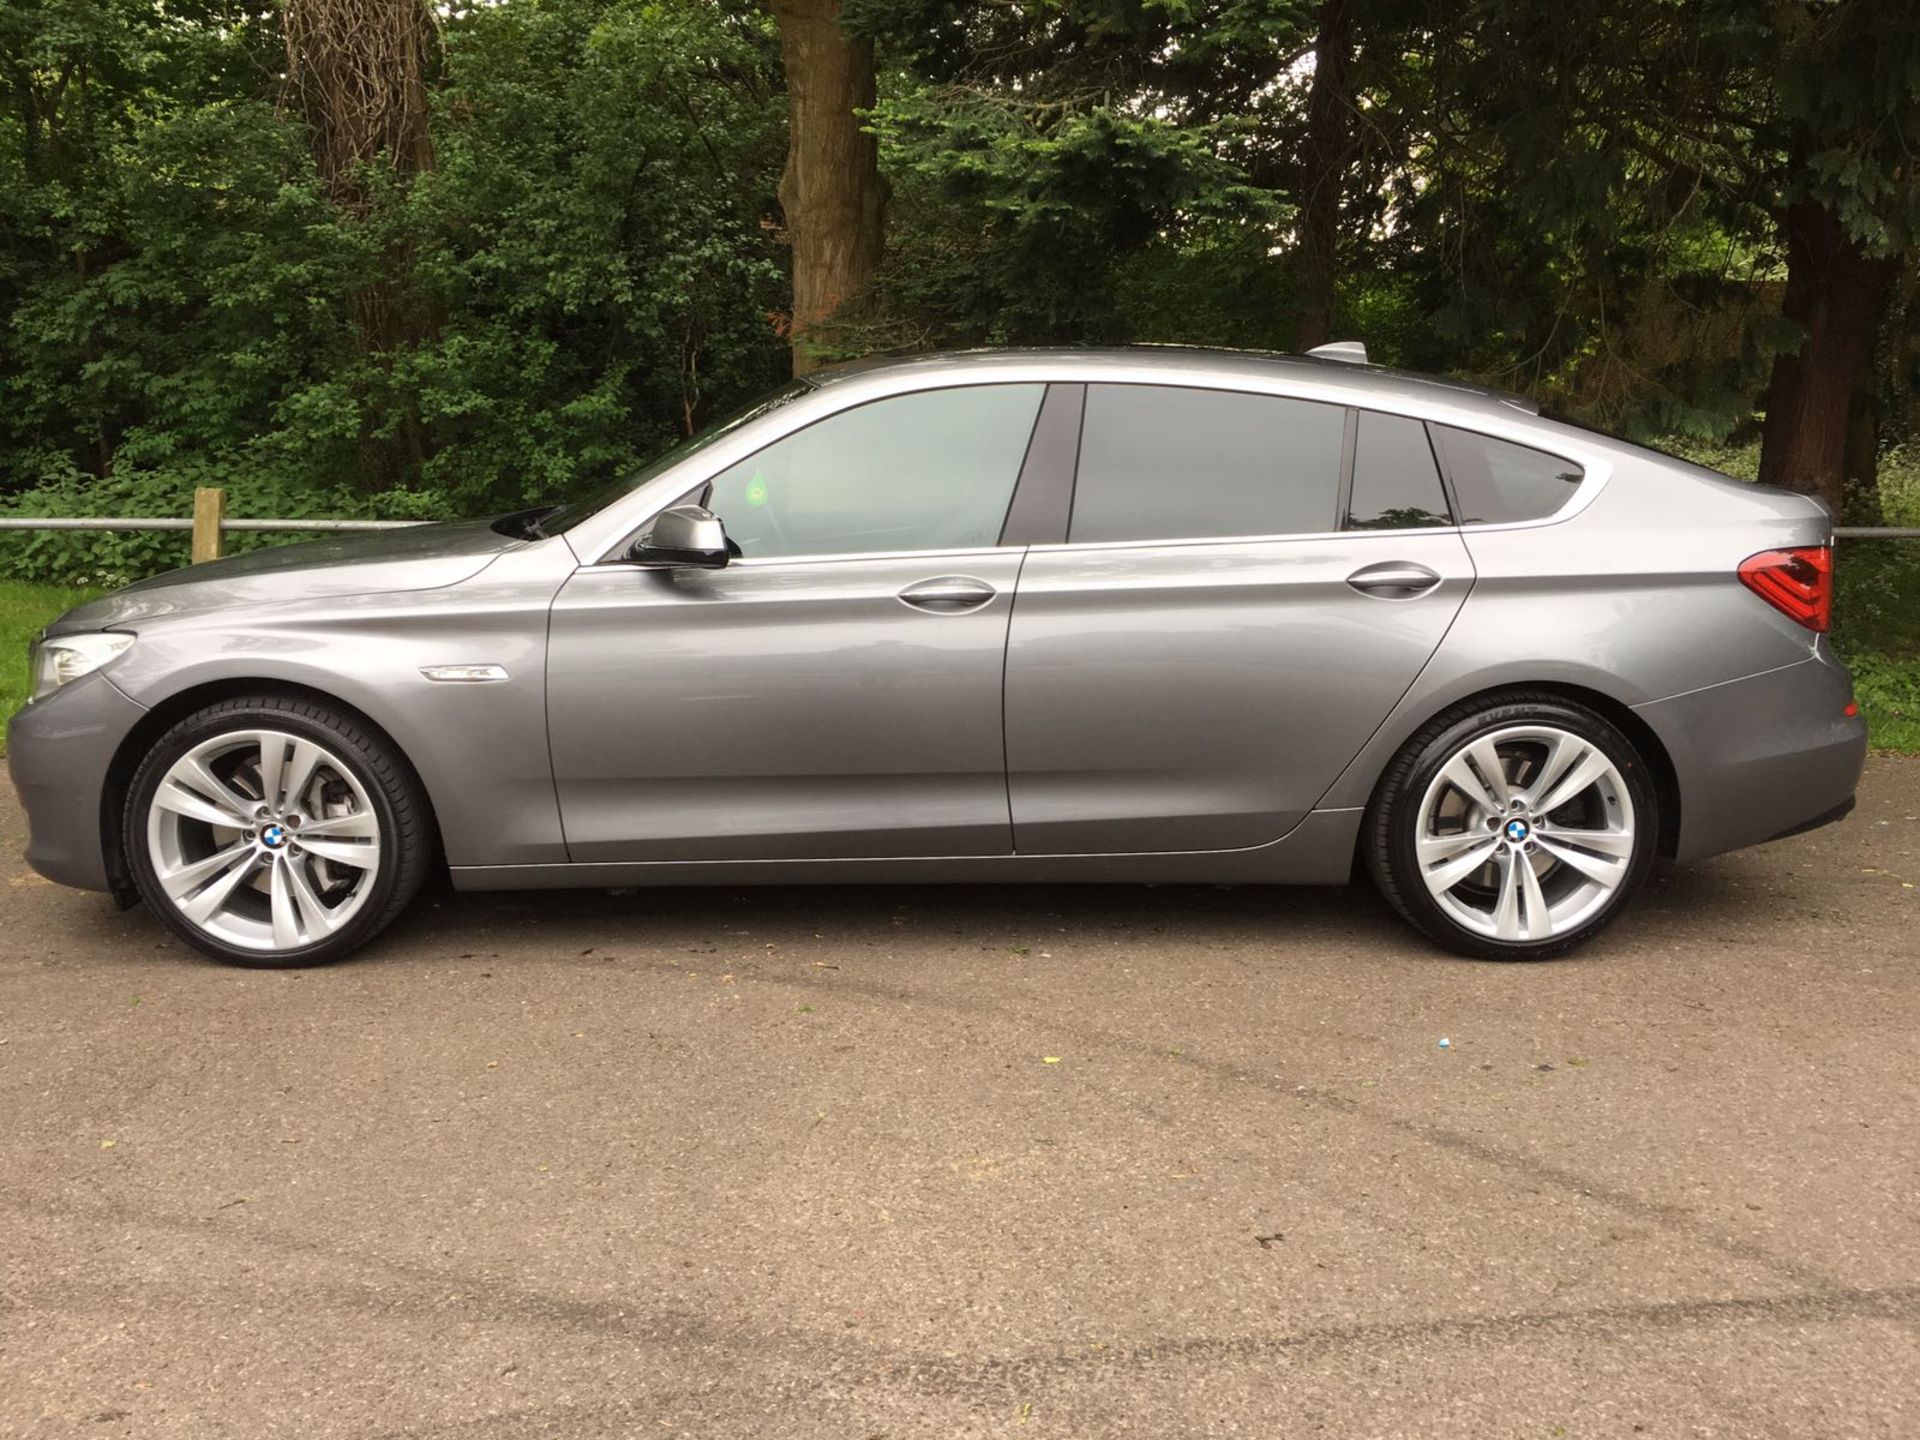 BMW 535D GT Gran Turismo 2012/12. 57,000 Miles. Automatic Gearbox - Image 4 of 19